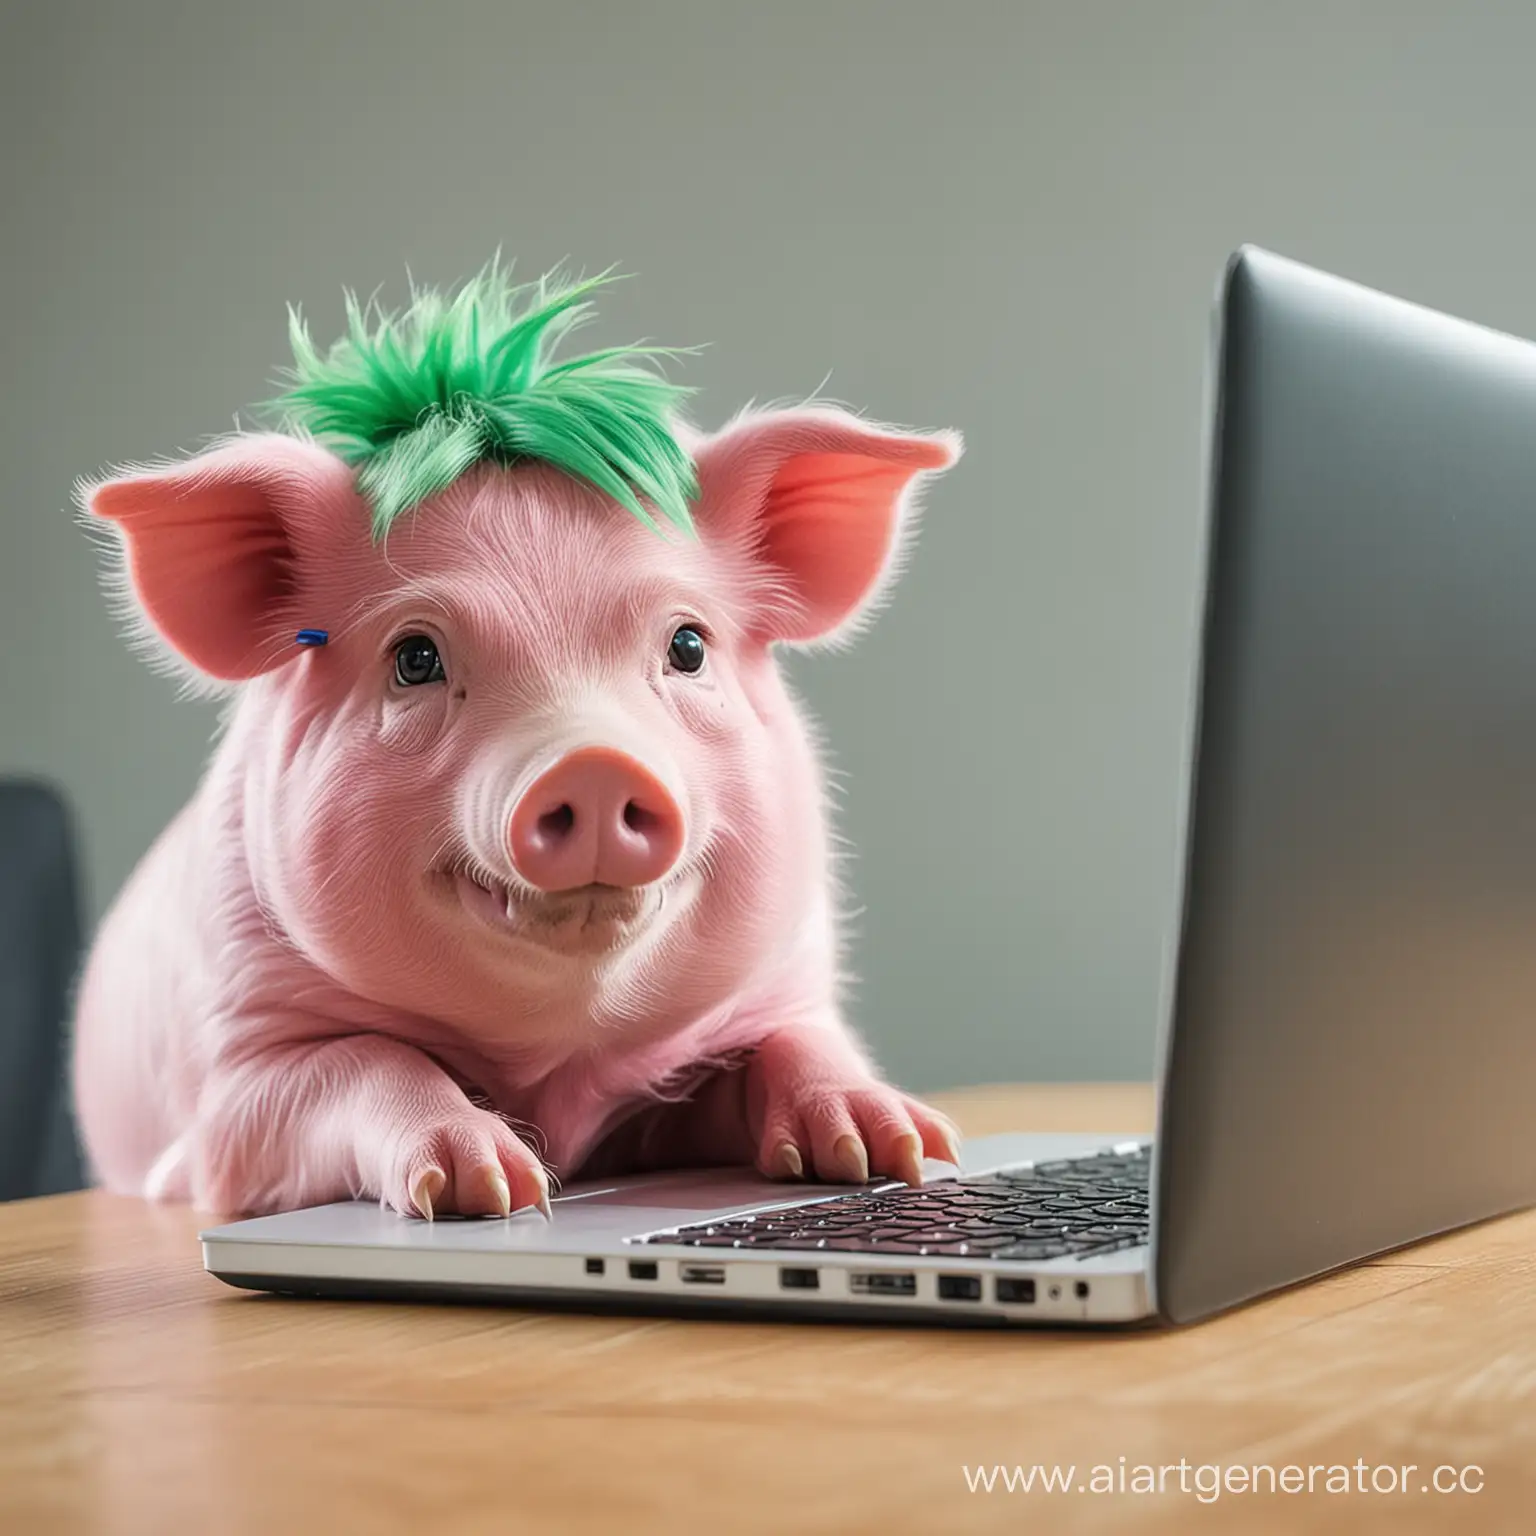 Playful-Pink-Pig-with-Bright-Green-Hair-Distracted-from-Term-Paper